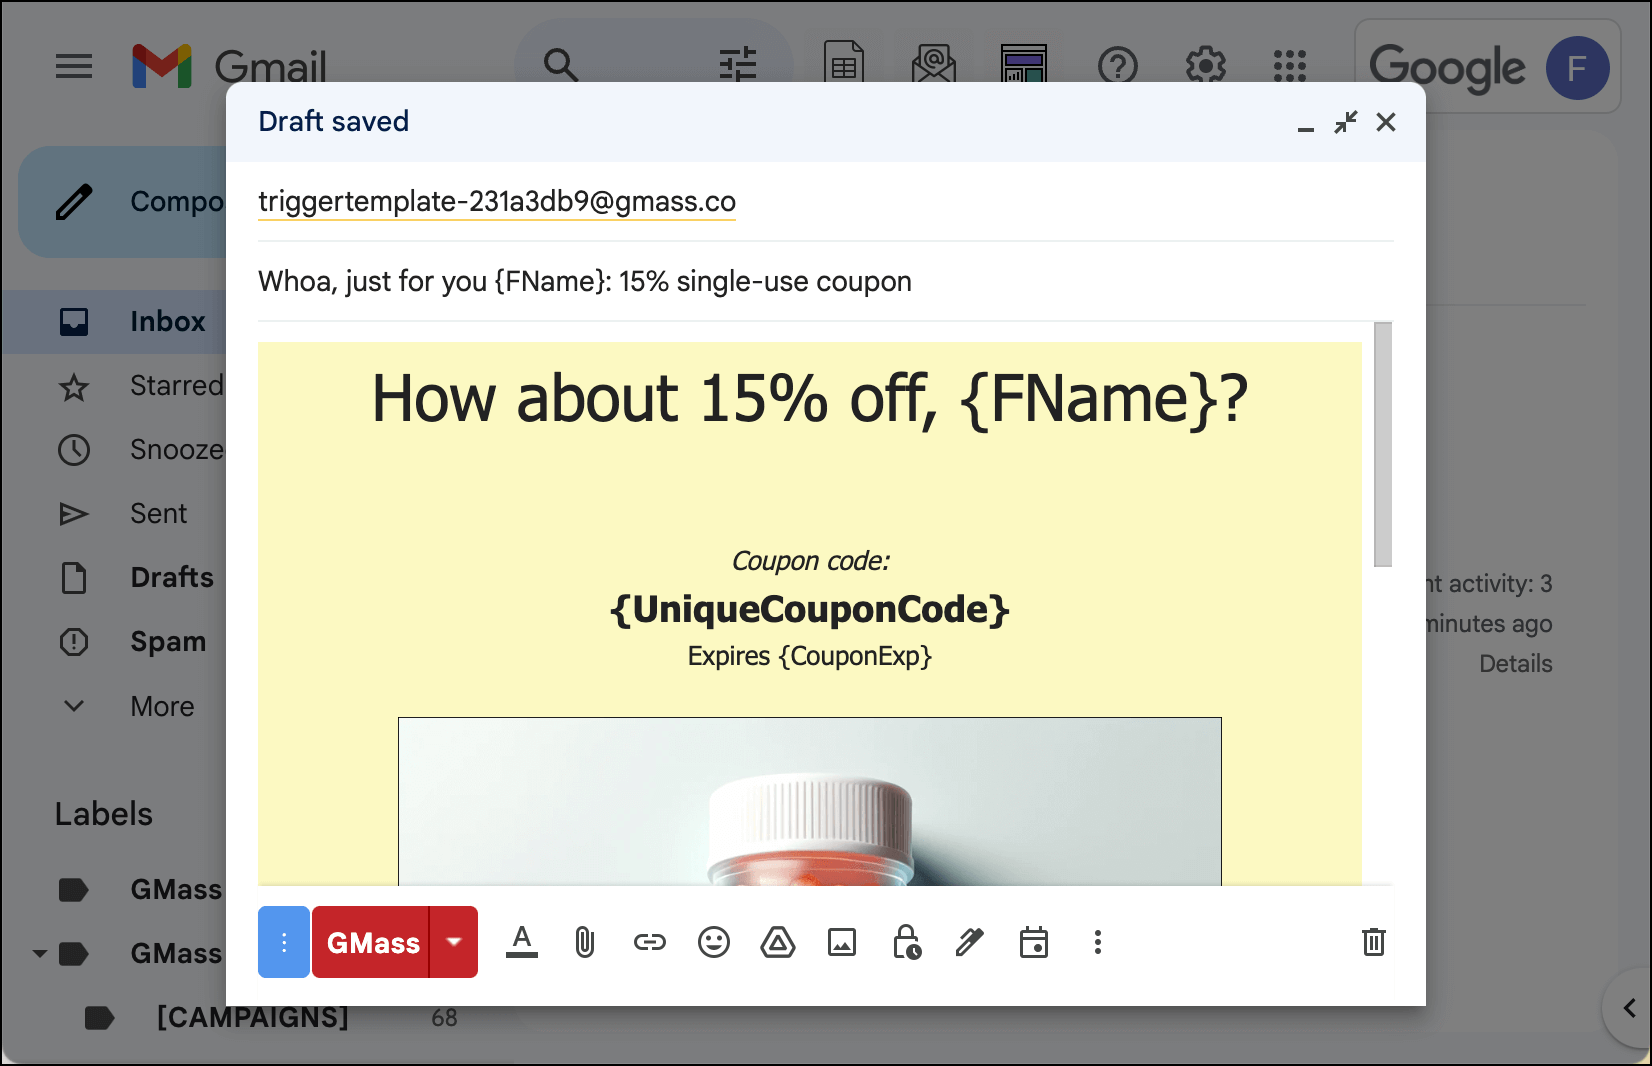 A triggered email with a coupon code